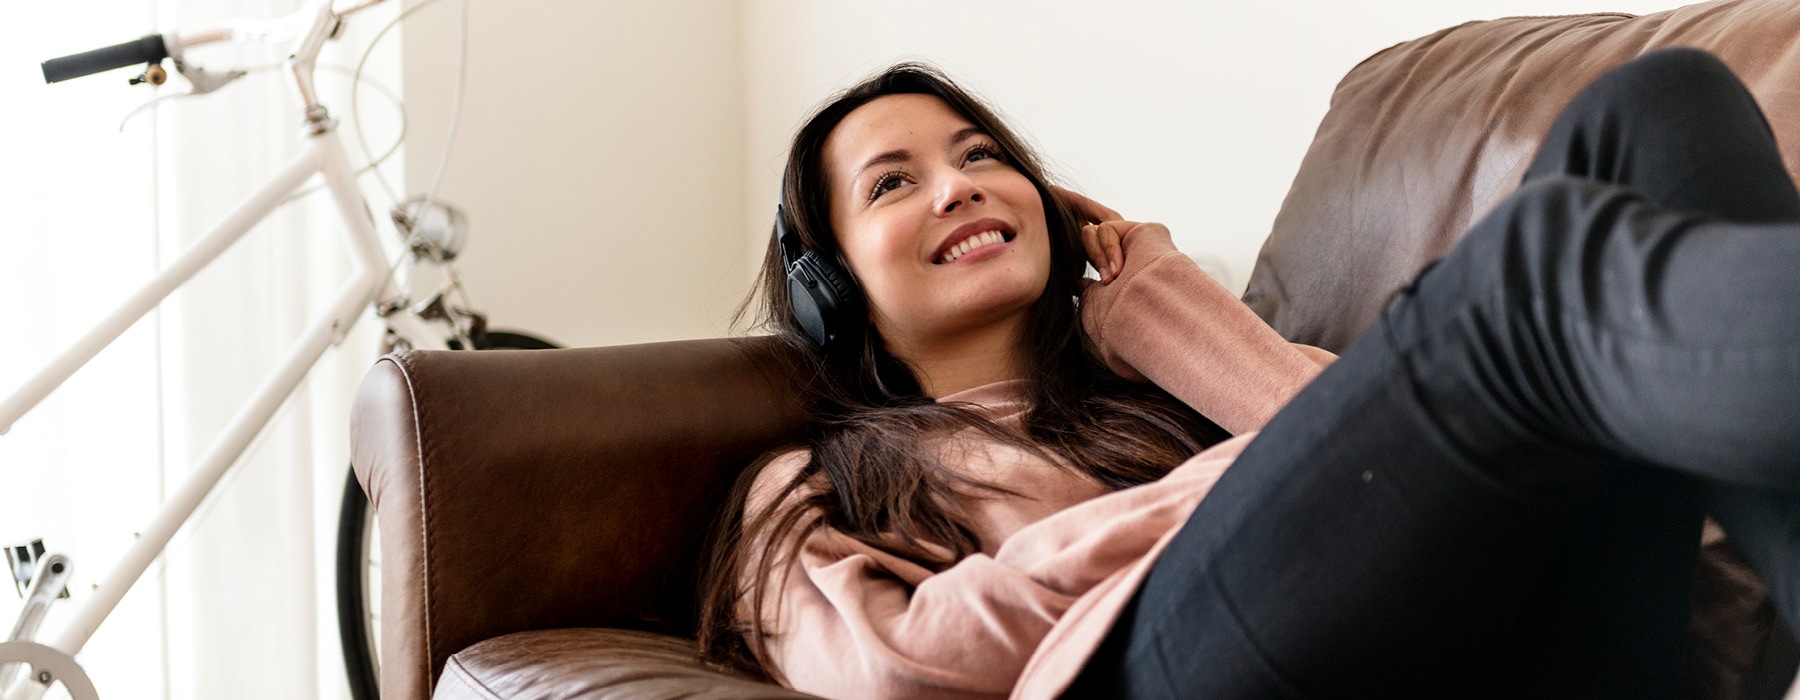 woman with headset, happily listens to music as she lays on her couch